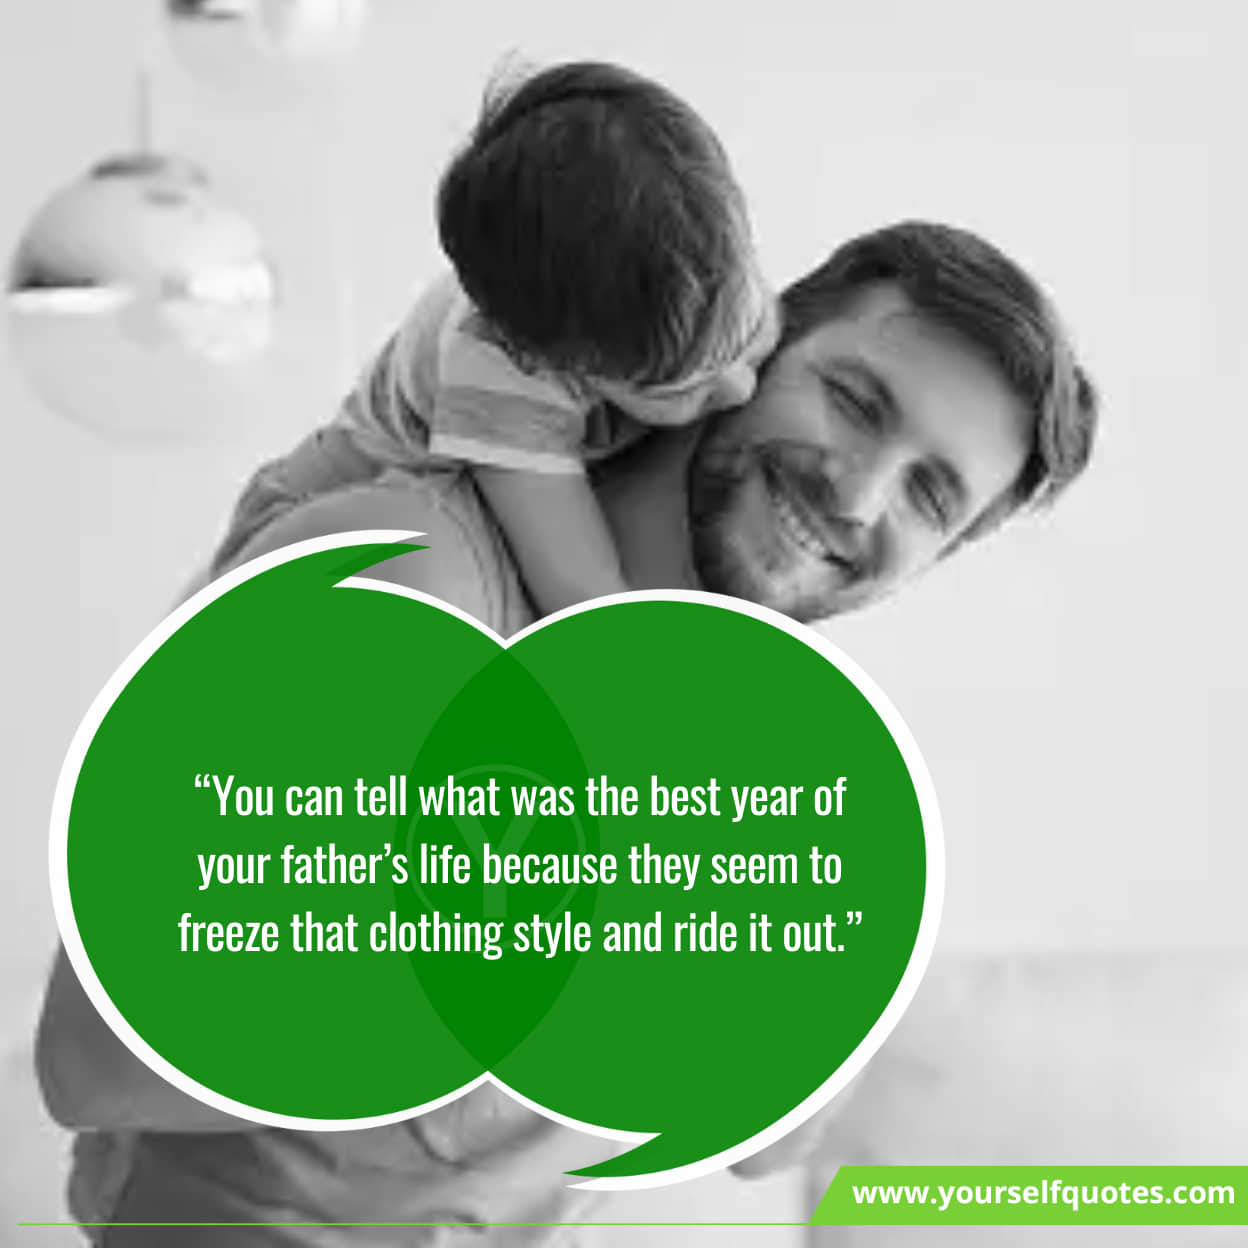 Quotes about fatherly love and guidance on Father's Day